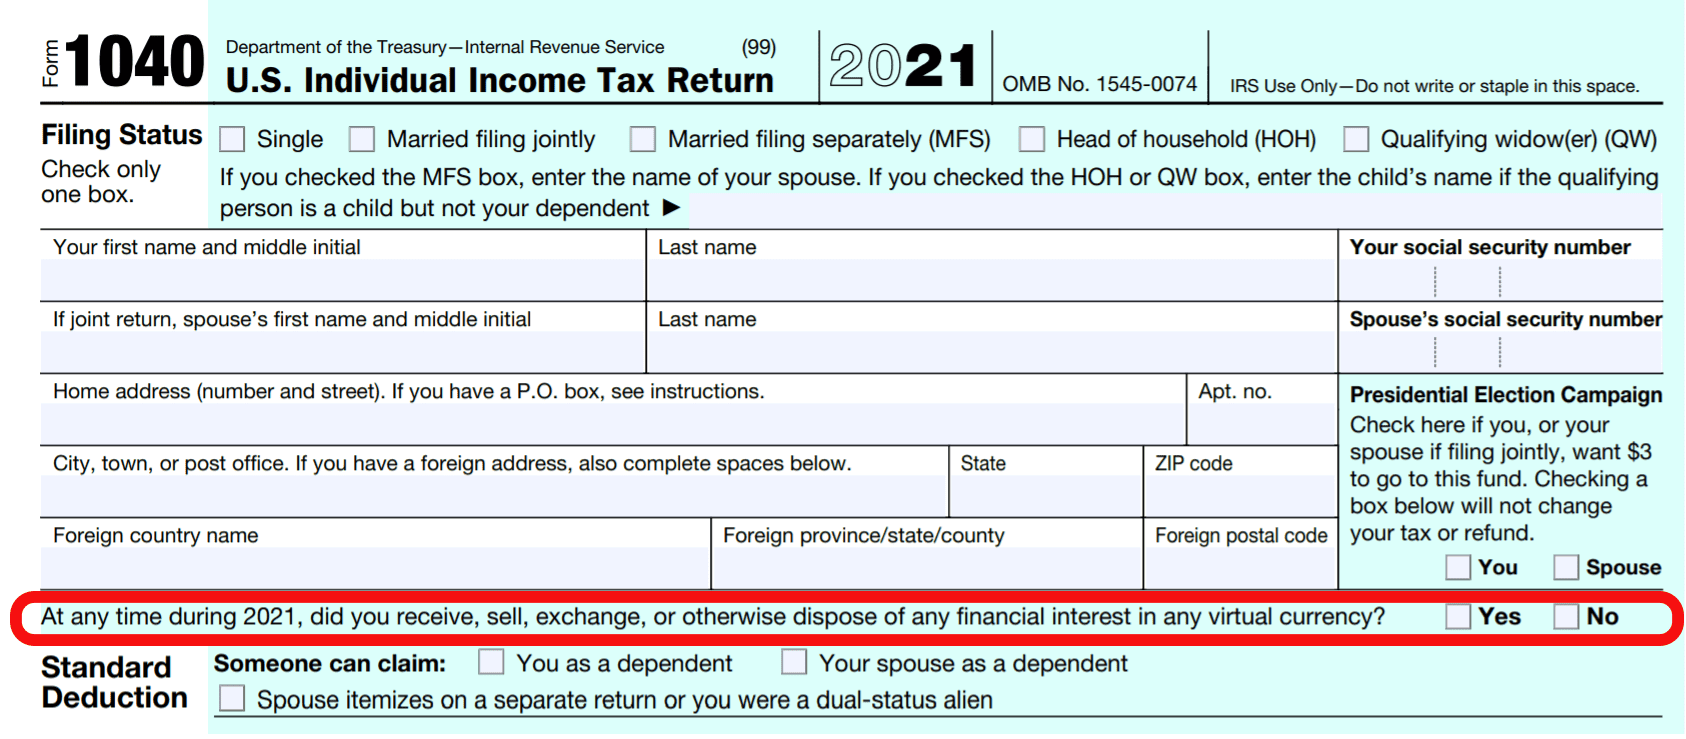 How to Report Bitcoin, Ether, Other Crypto on Your IRS Tax Return in 